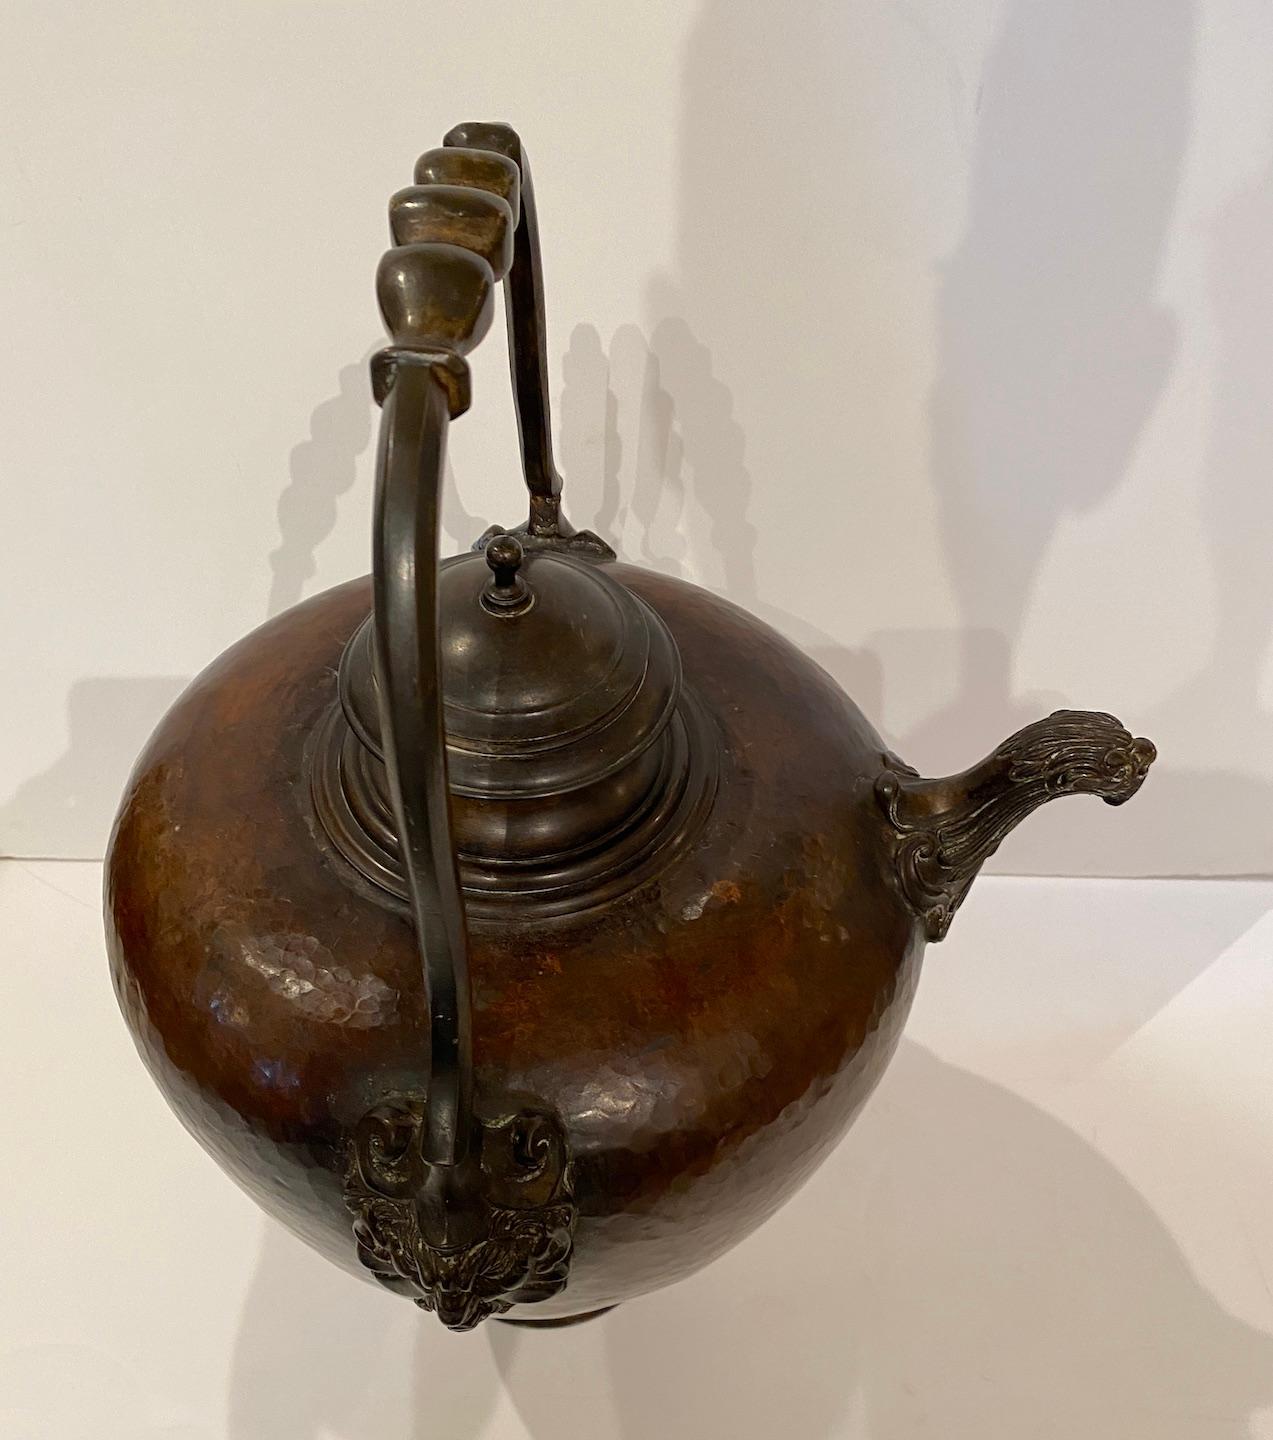 Hand pounded copper ewer with bronze spout, handle and top. From the area of Florence, Italy, circa 1800.